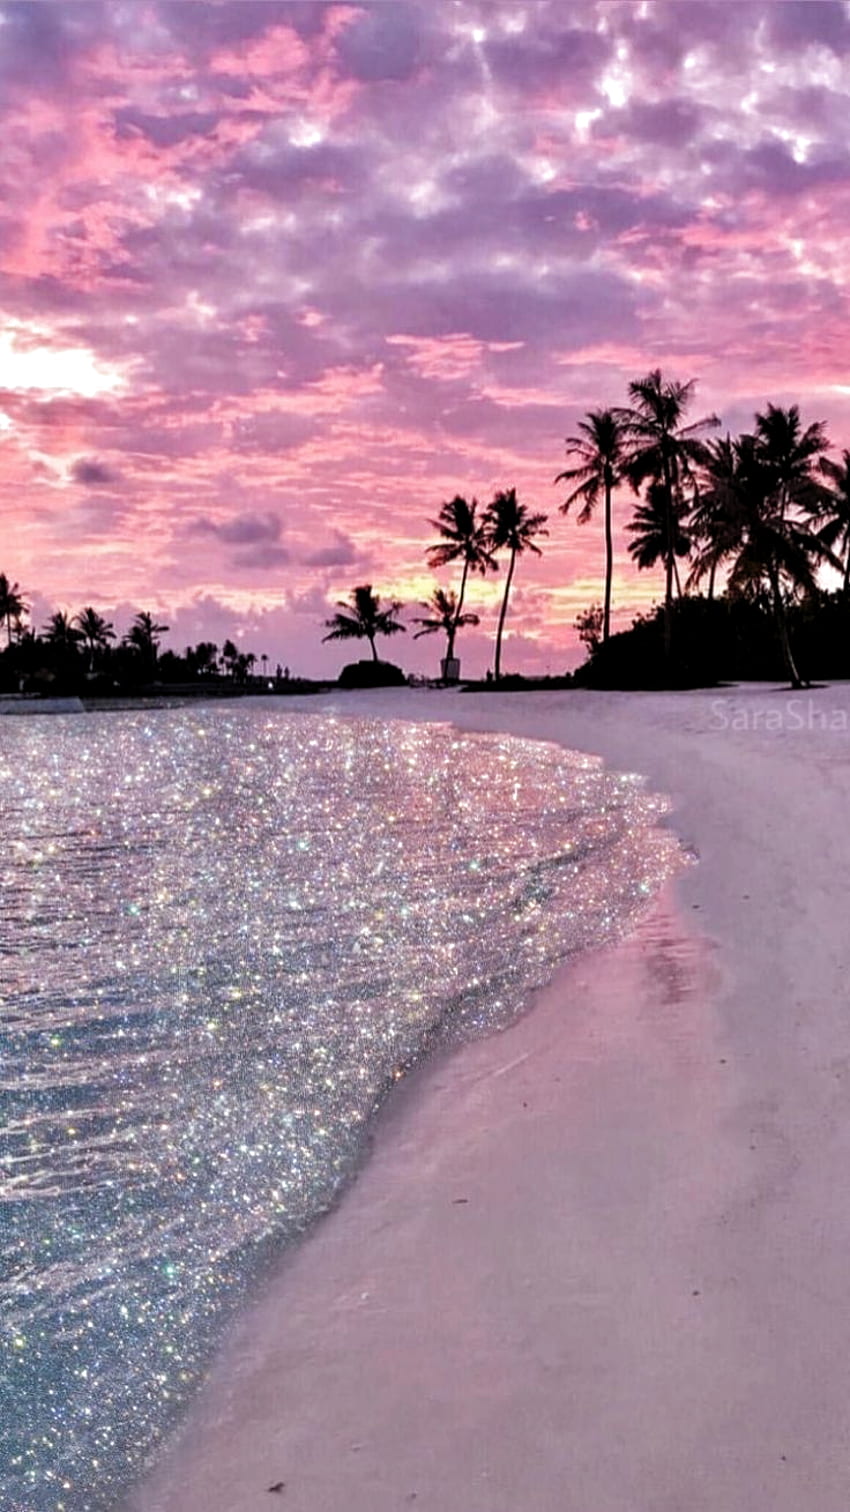 A beach with palm trees and pink sky - Beach, beautiful, nature